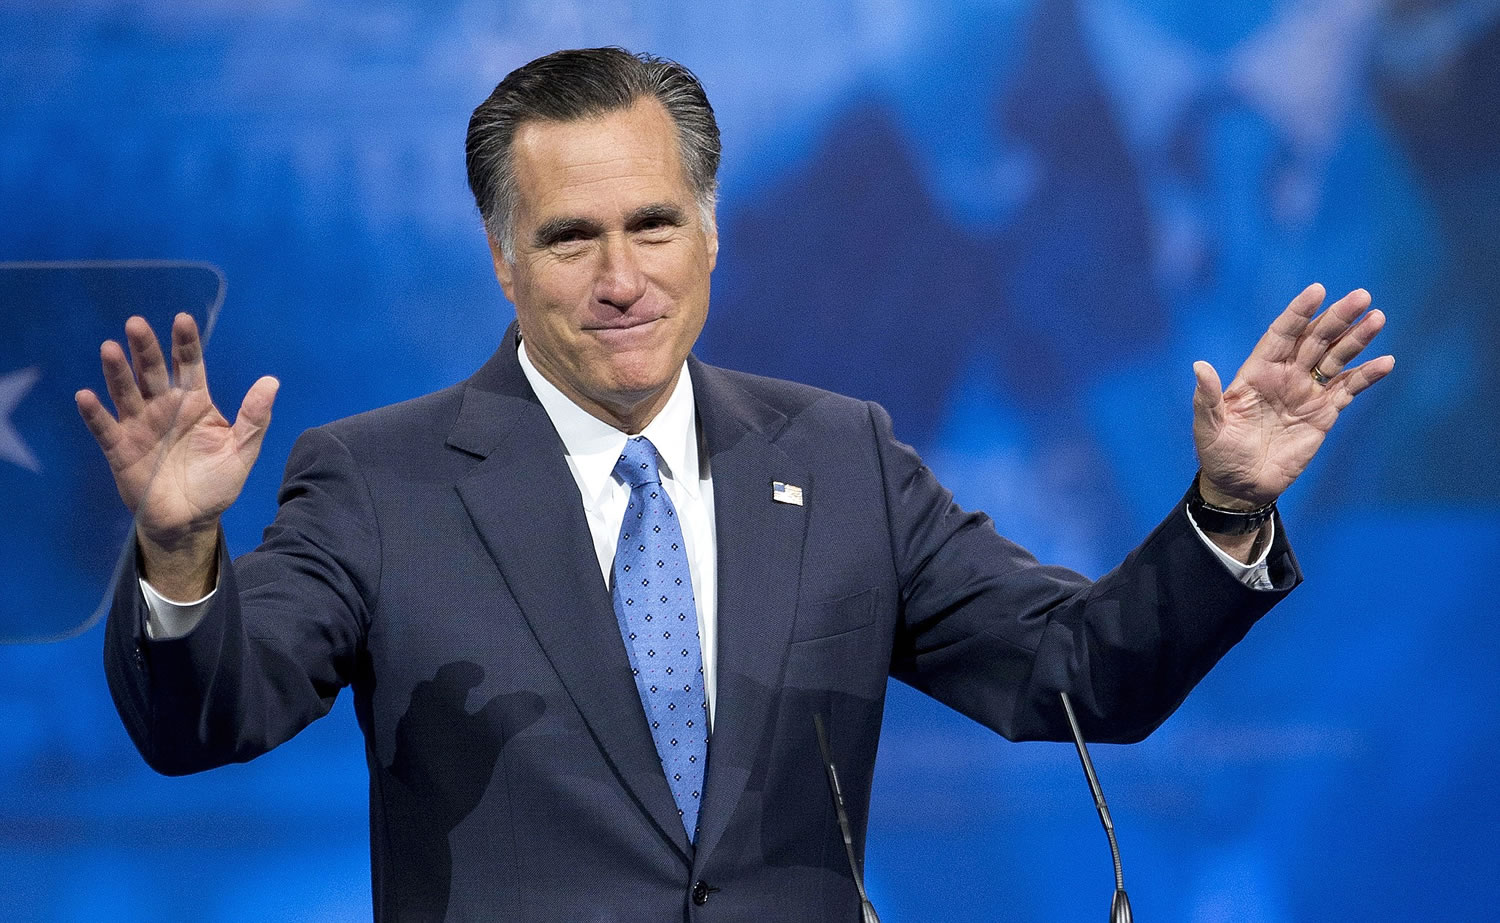 Former Massachusetts Gov., and 2012 Republican presidential candidate, Mitt Romney in National Harbor, Md.